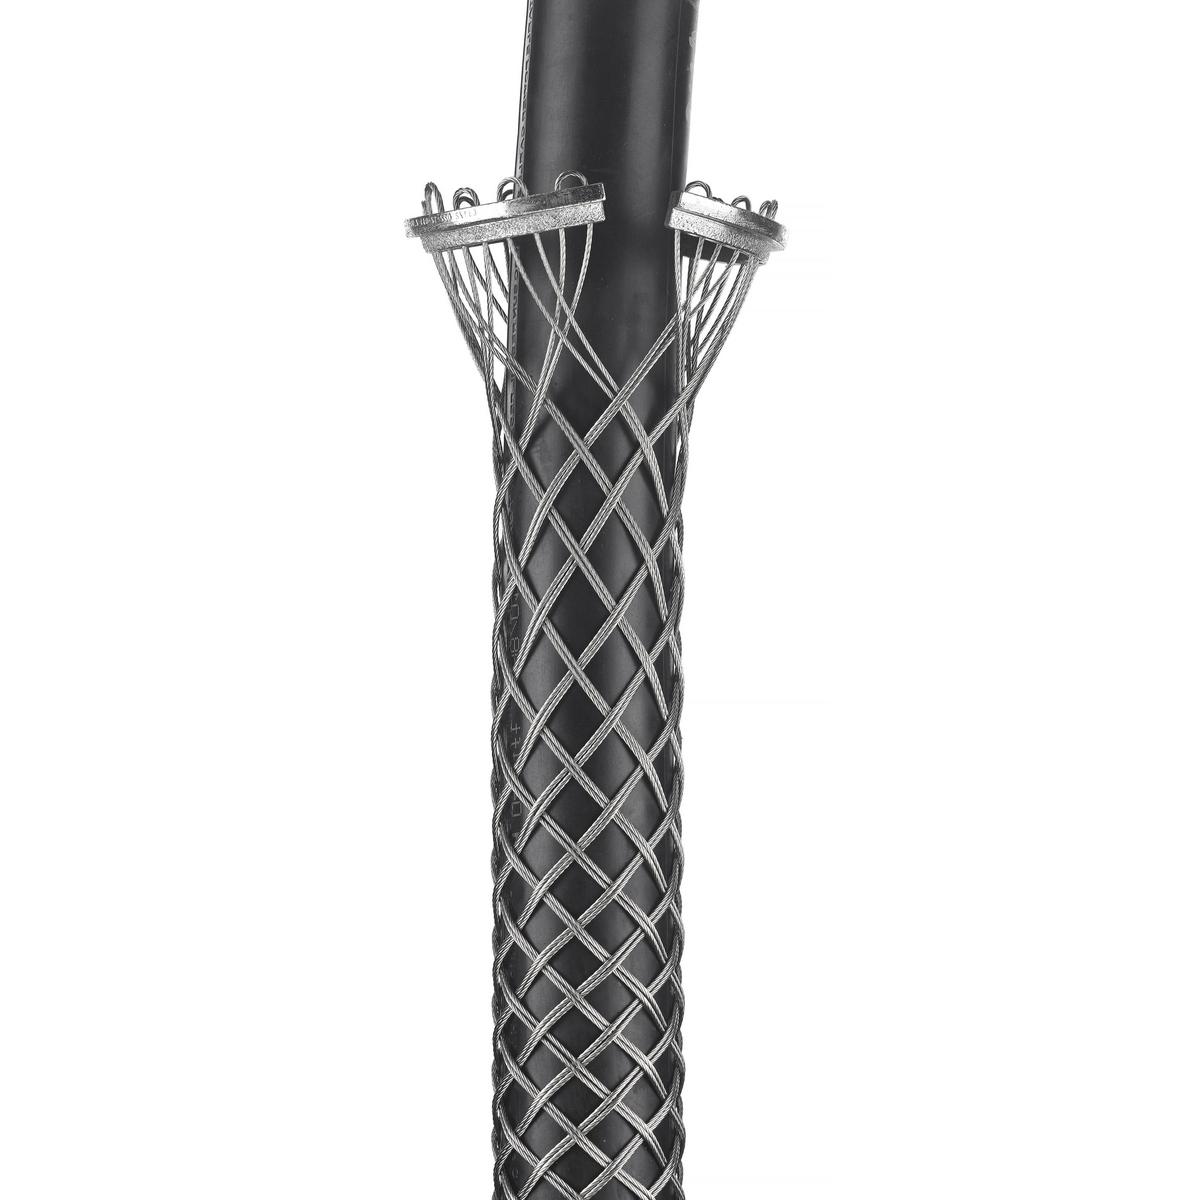 Hubbell 02212061 Conduit Riser Grips, 2.50-2.99", 5", Ring Type, Double Weave, Split Mesh, Lace Closing  ; Suitable for standard rigid metal conduit and schedule 40 rigid PVC conduit only ; Pemanently fastened to support ring ; For permanent support when cable end is avai